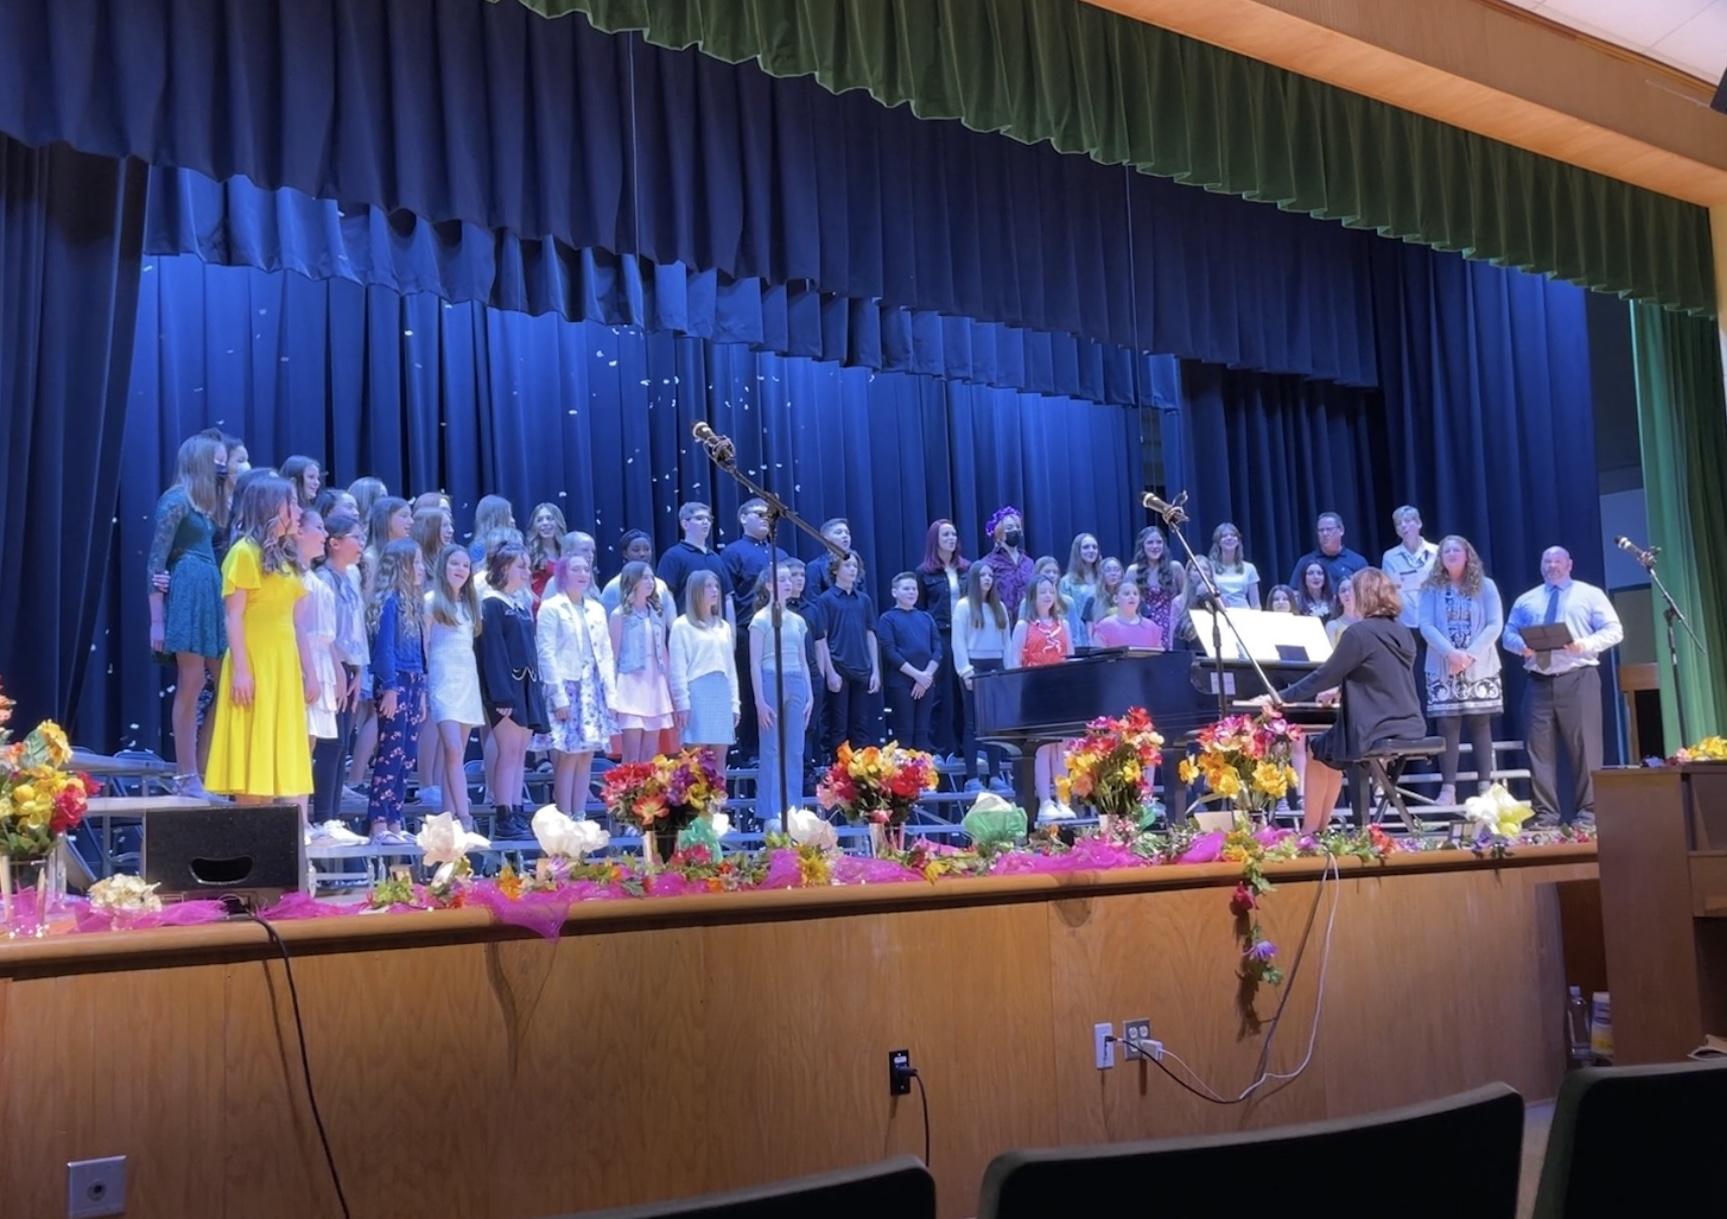 The closing song featuring the TMS Chorus and Mr. Sullivan, Mrs. Rodgers, Mrs. Sekera, Mrs. Lamanna, and Mr. Bacco